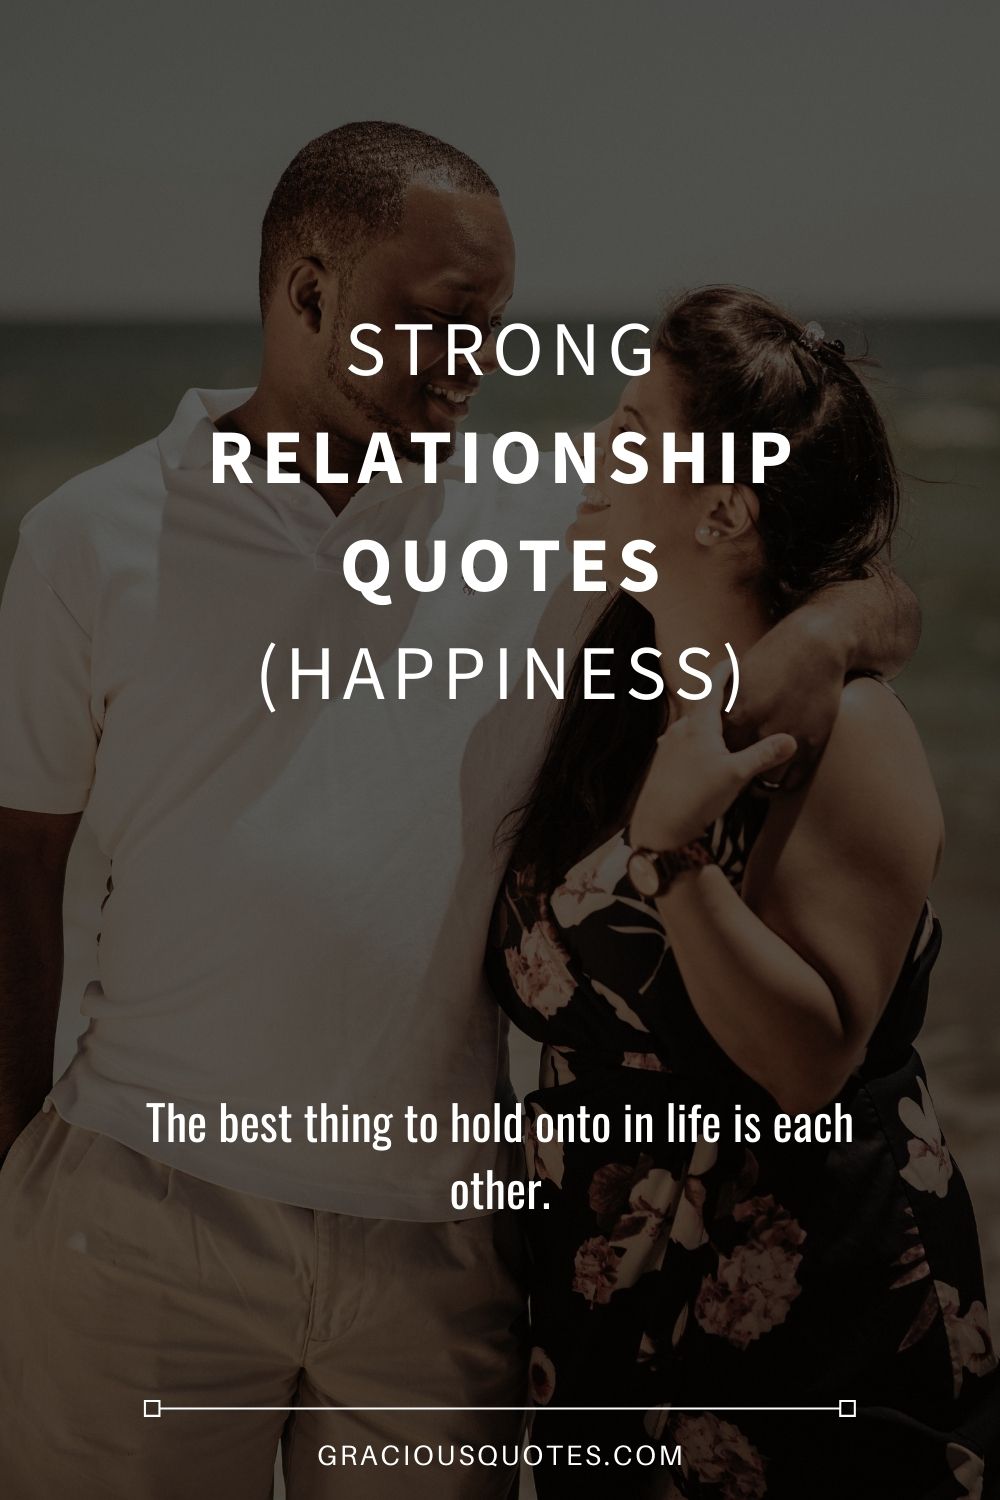 Strong Relationship Quotes (HAPPINESS) - Gracious Quotes